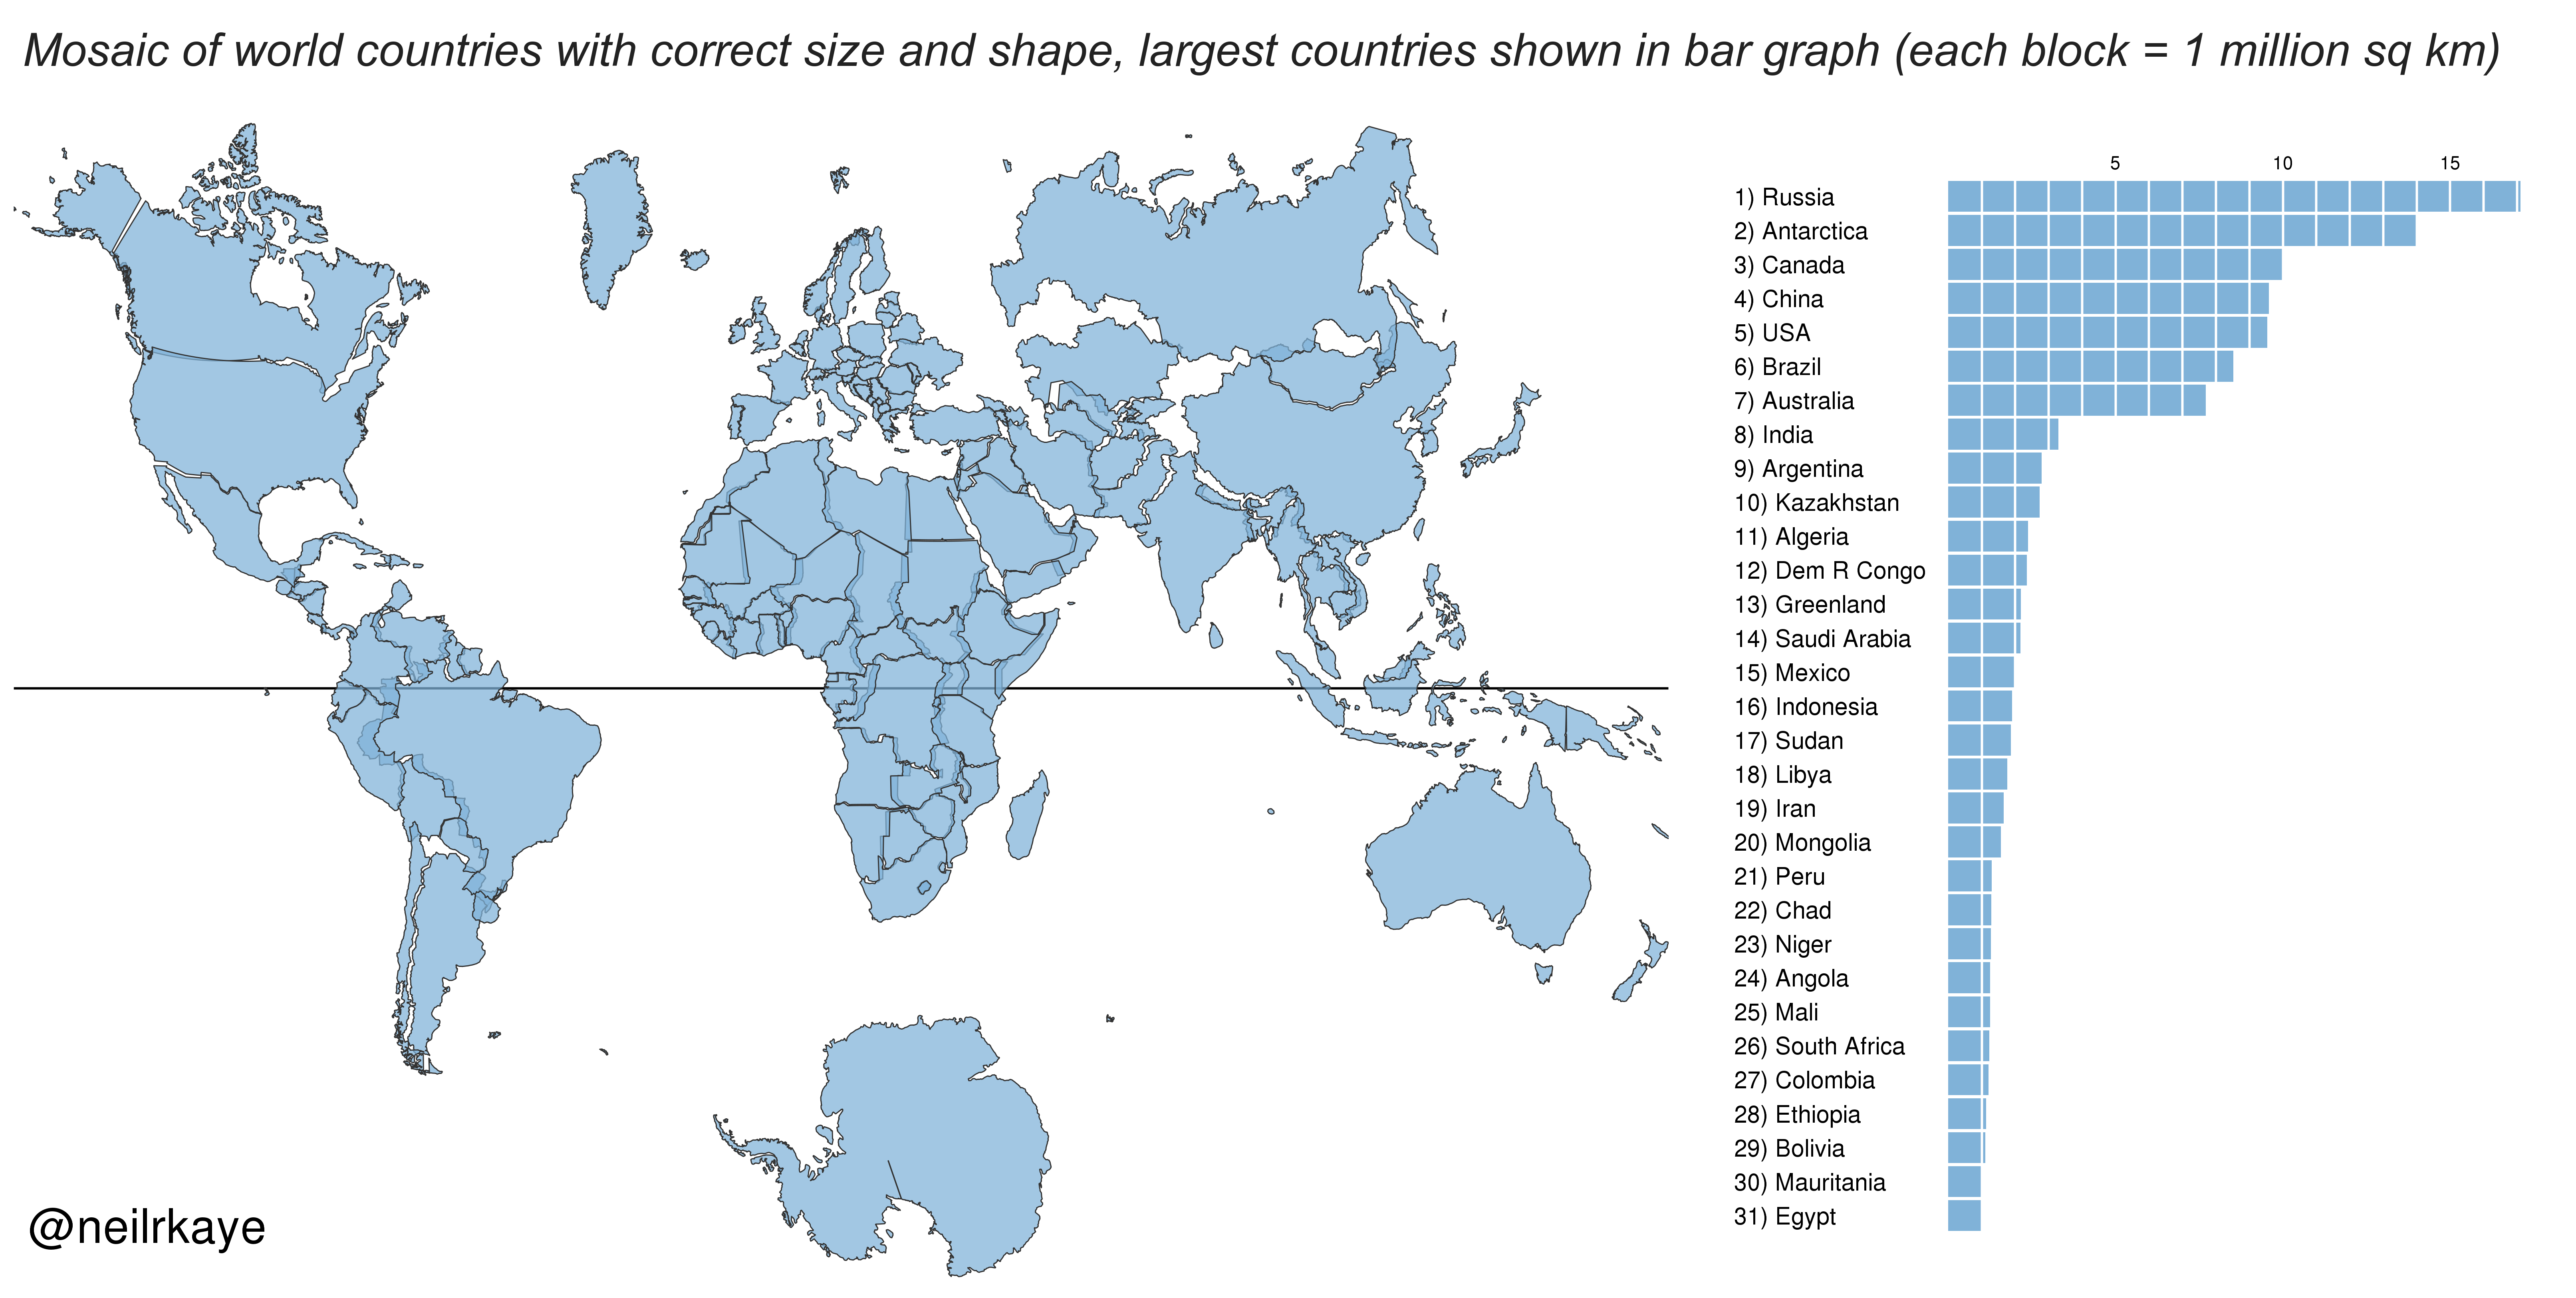 A mosaic of world countries retaining their correct size and shape